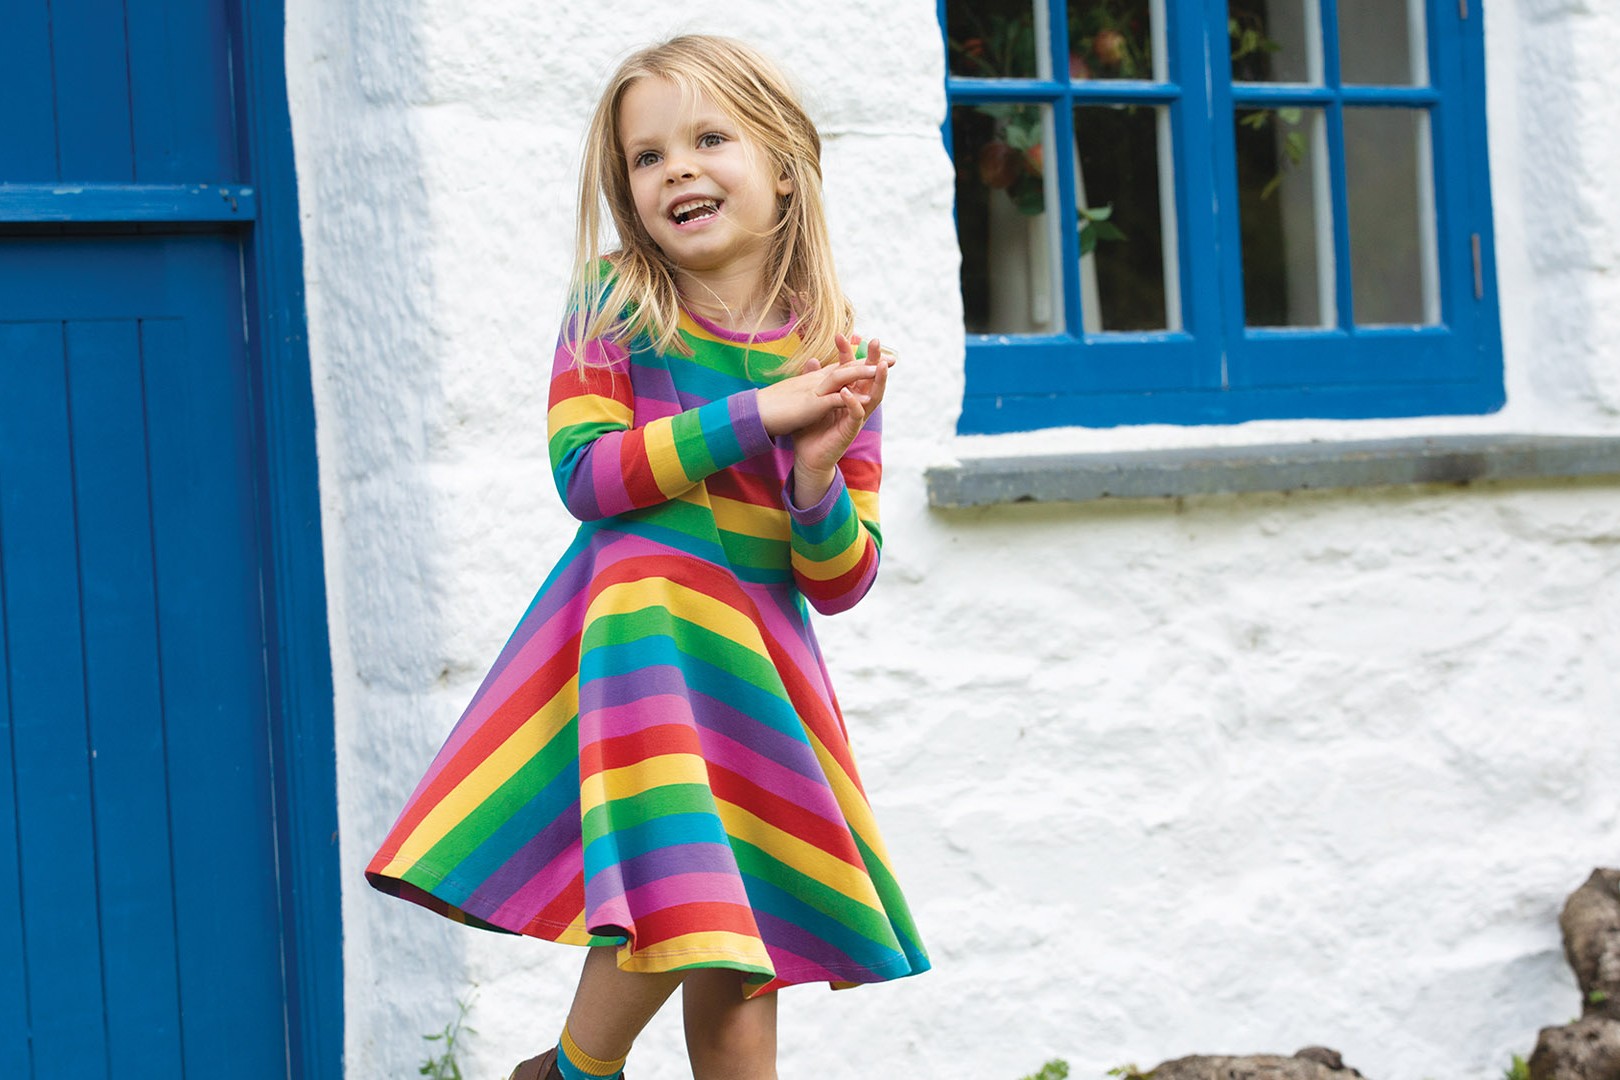 Celtic & Co owner acquires ethical fashion Frugi